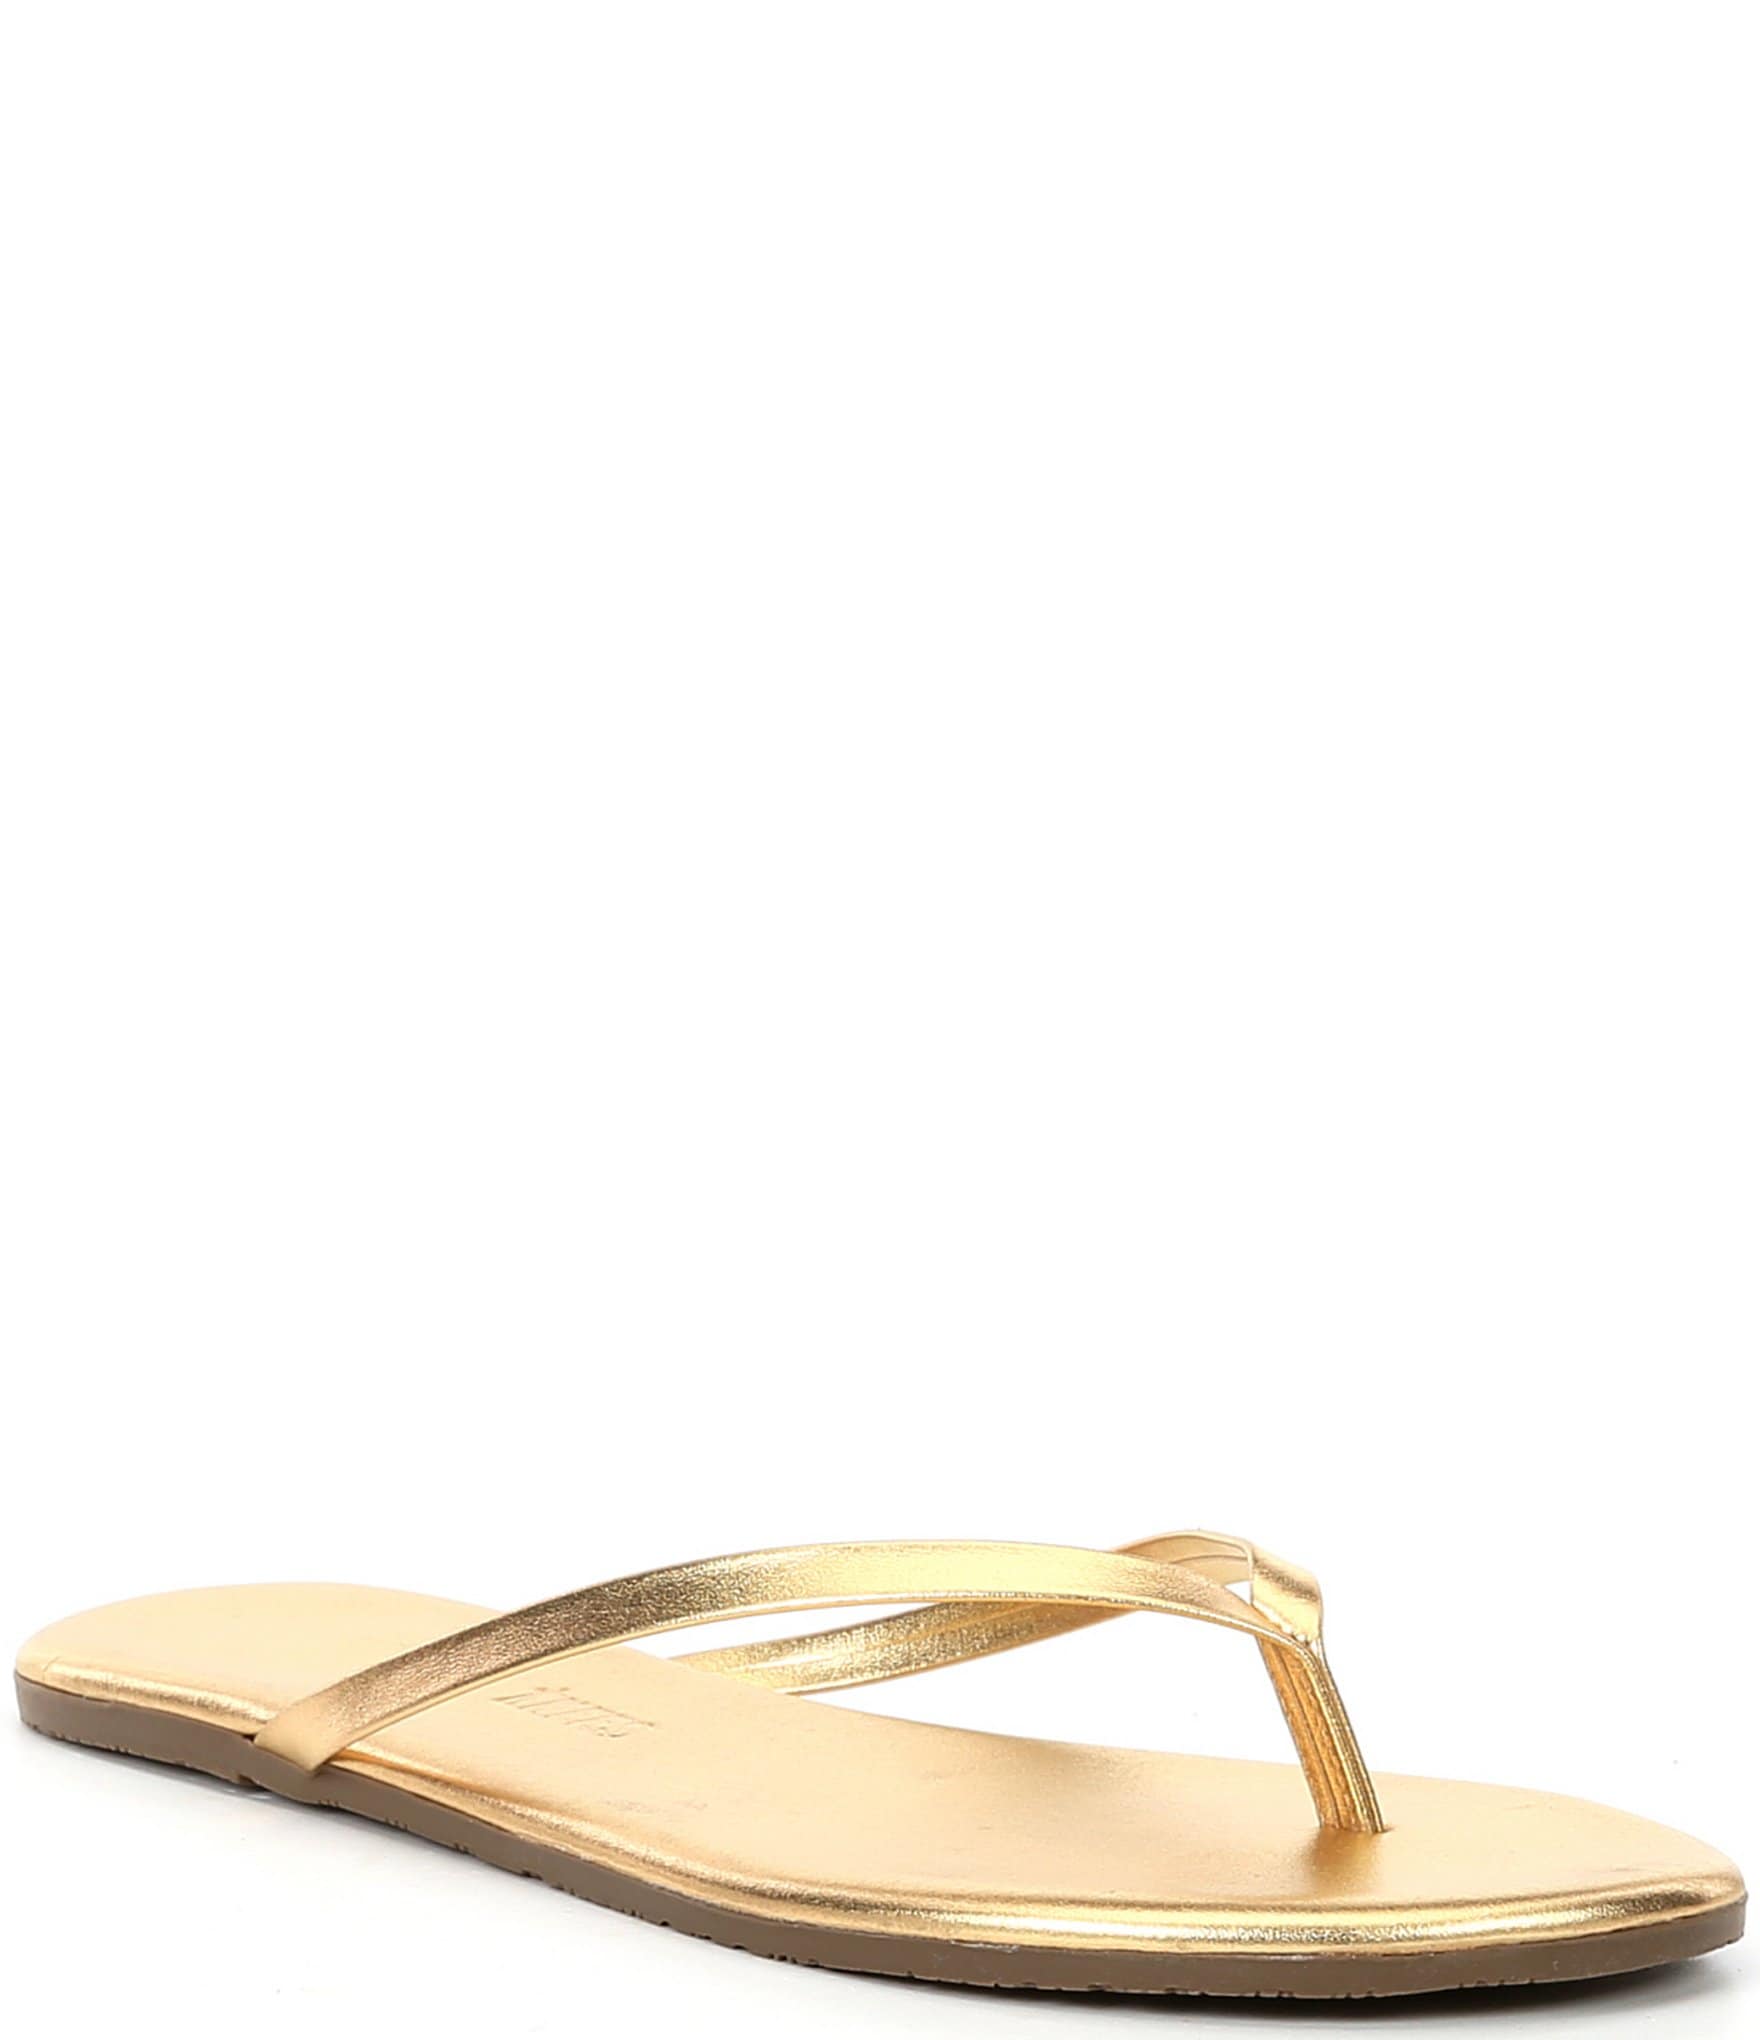 TKEES Highlighters Metallic Leather Thong Sandals | Dillard's